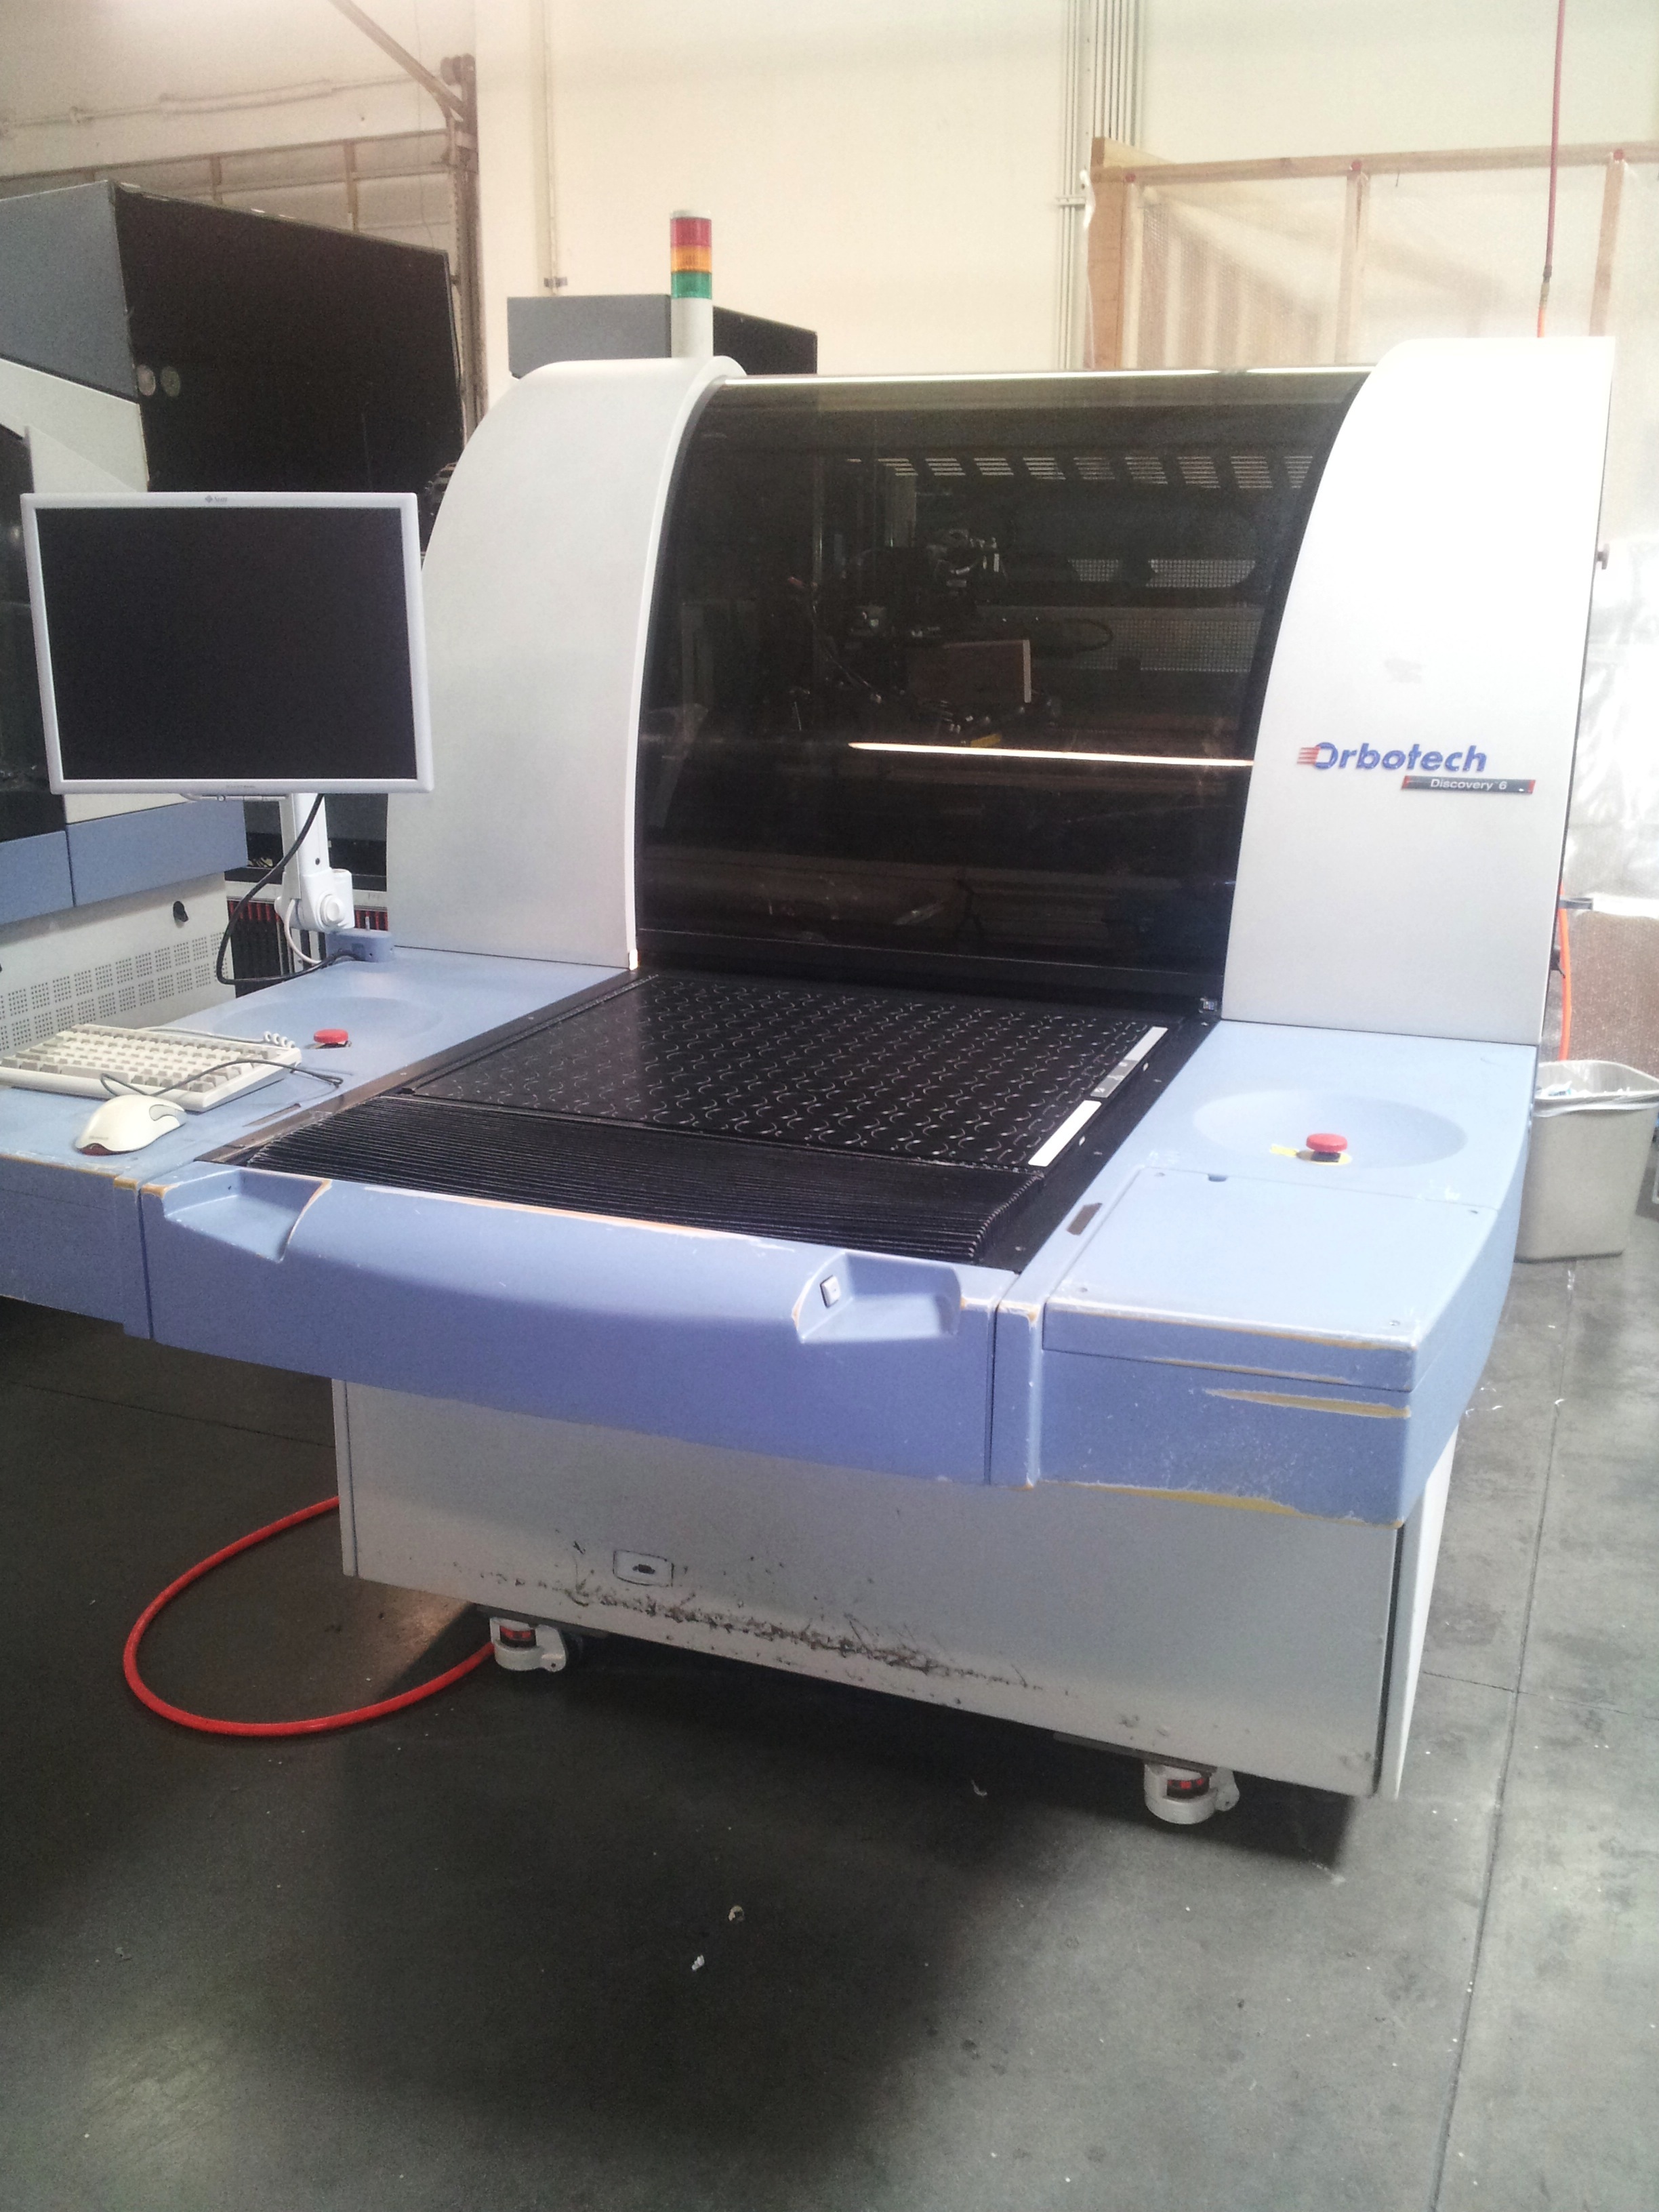 Photo Used ORBOTECH Discovery 6 For Sale